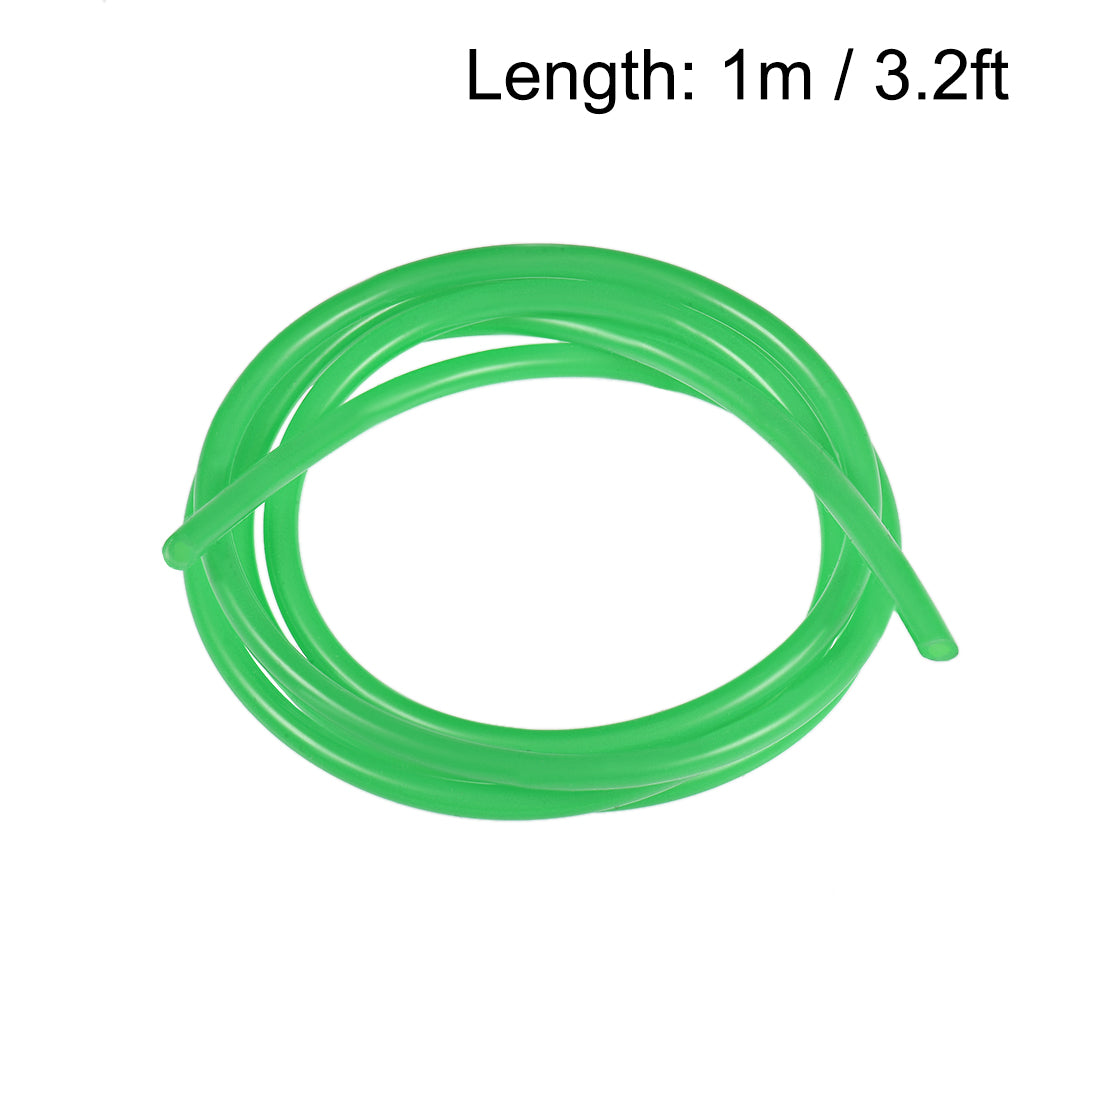 Uxcell Uxcell Silicone Tube, 4mm ID x 6mm OD 1m/3.3ft  Tubing Green